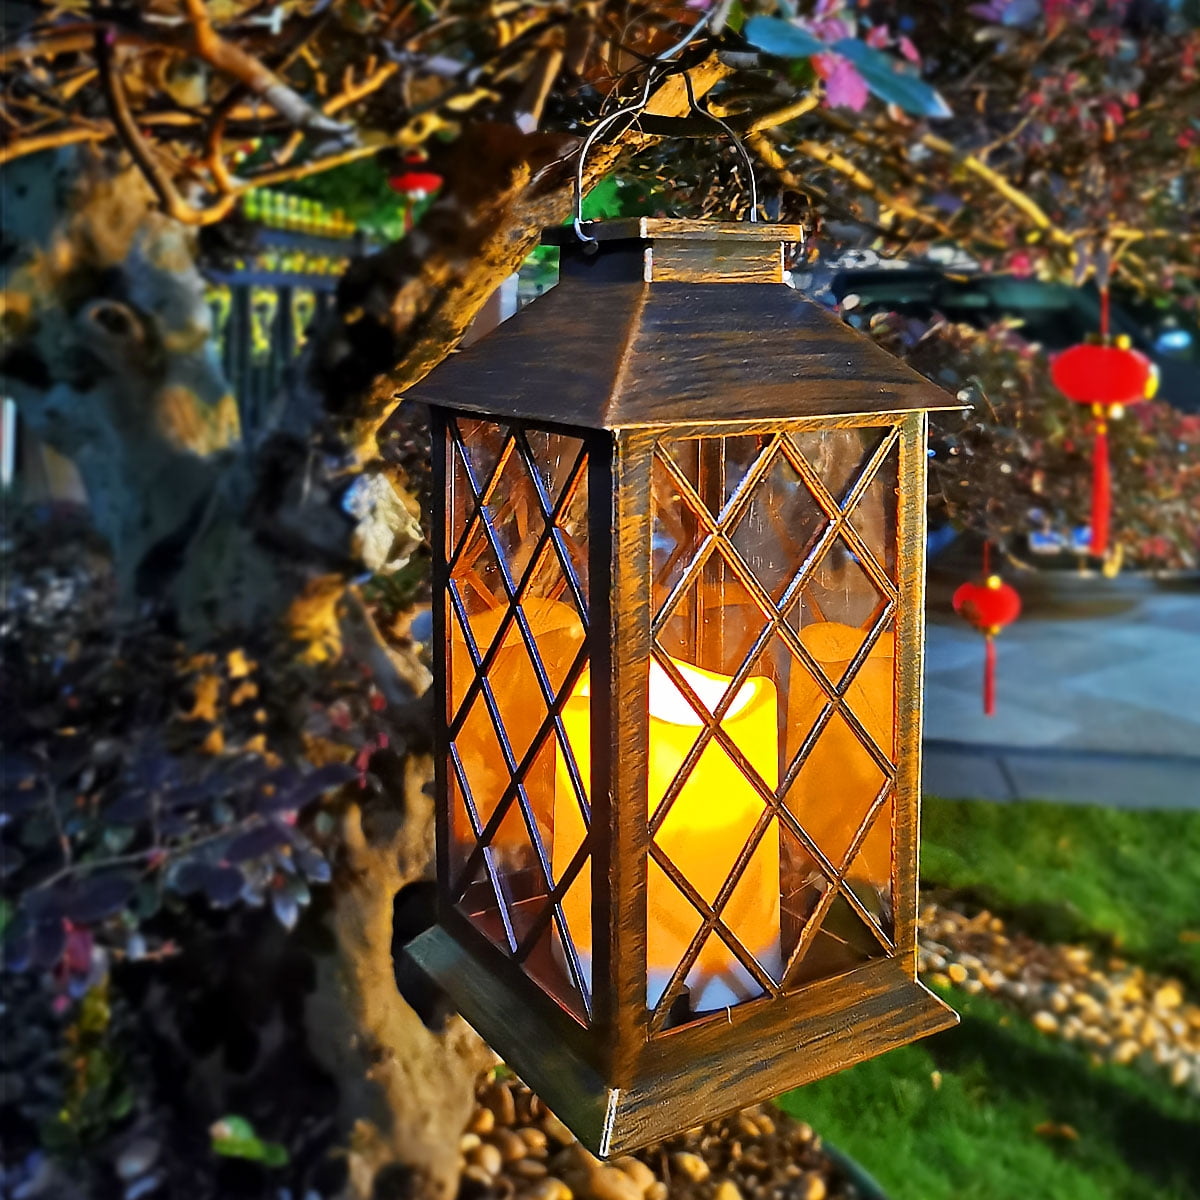 Solar Lantern,Outdoor Garden Hanging Lantern,Waterproof LED Flickering  Flameless Candle Mission Lights for Table,Outdoor,Party Decorative 